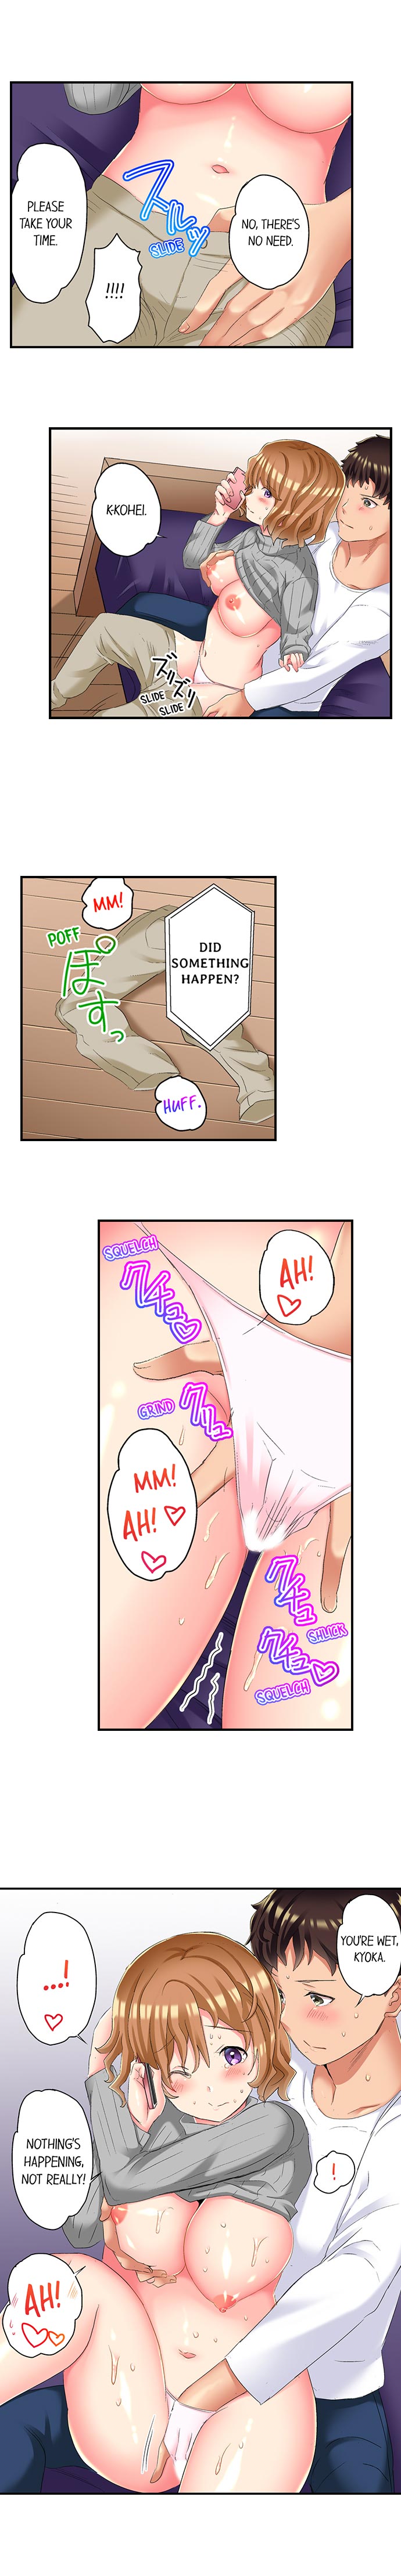 NTR Massage - Chapter 18 Page 2